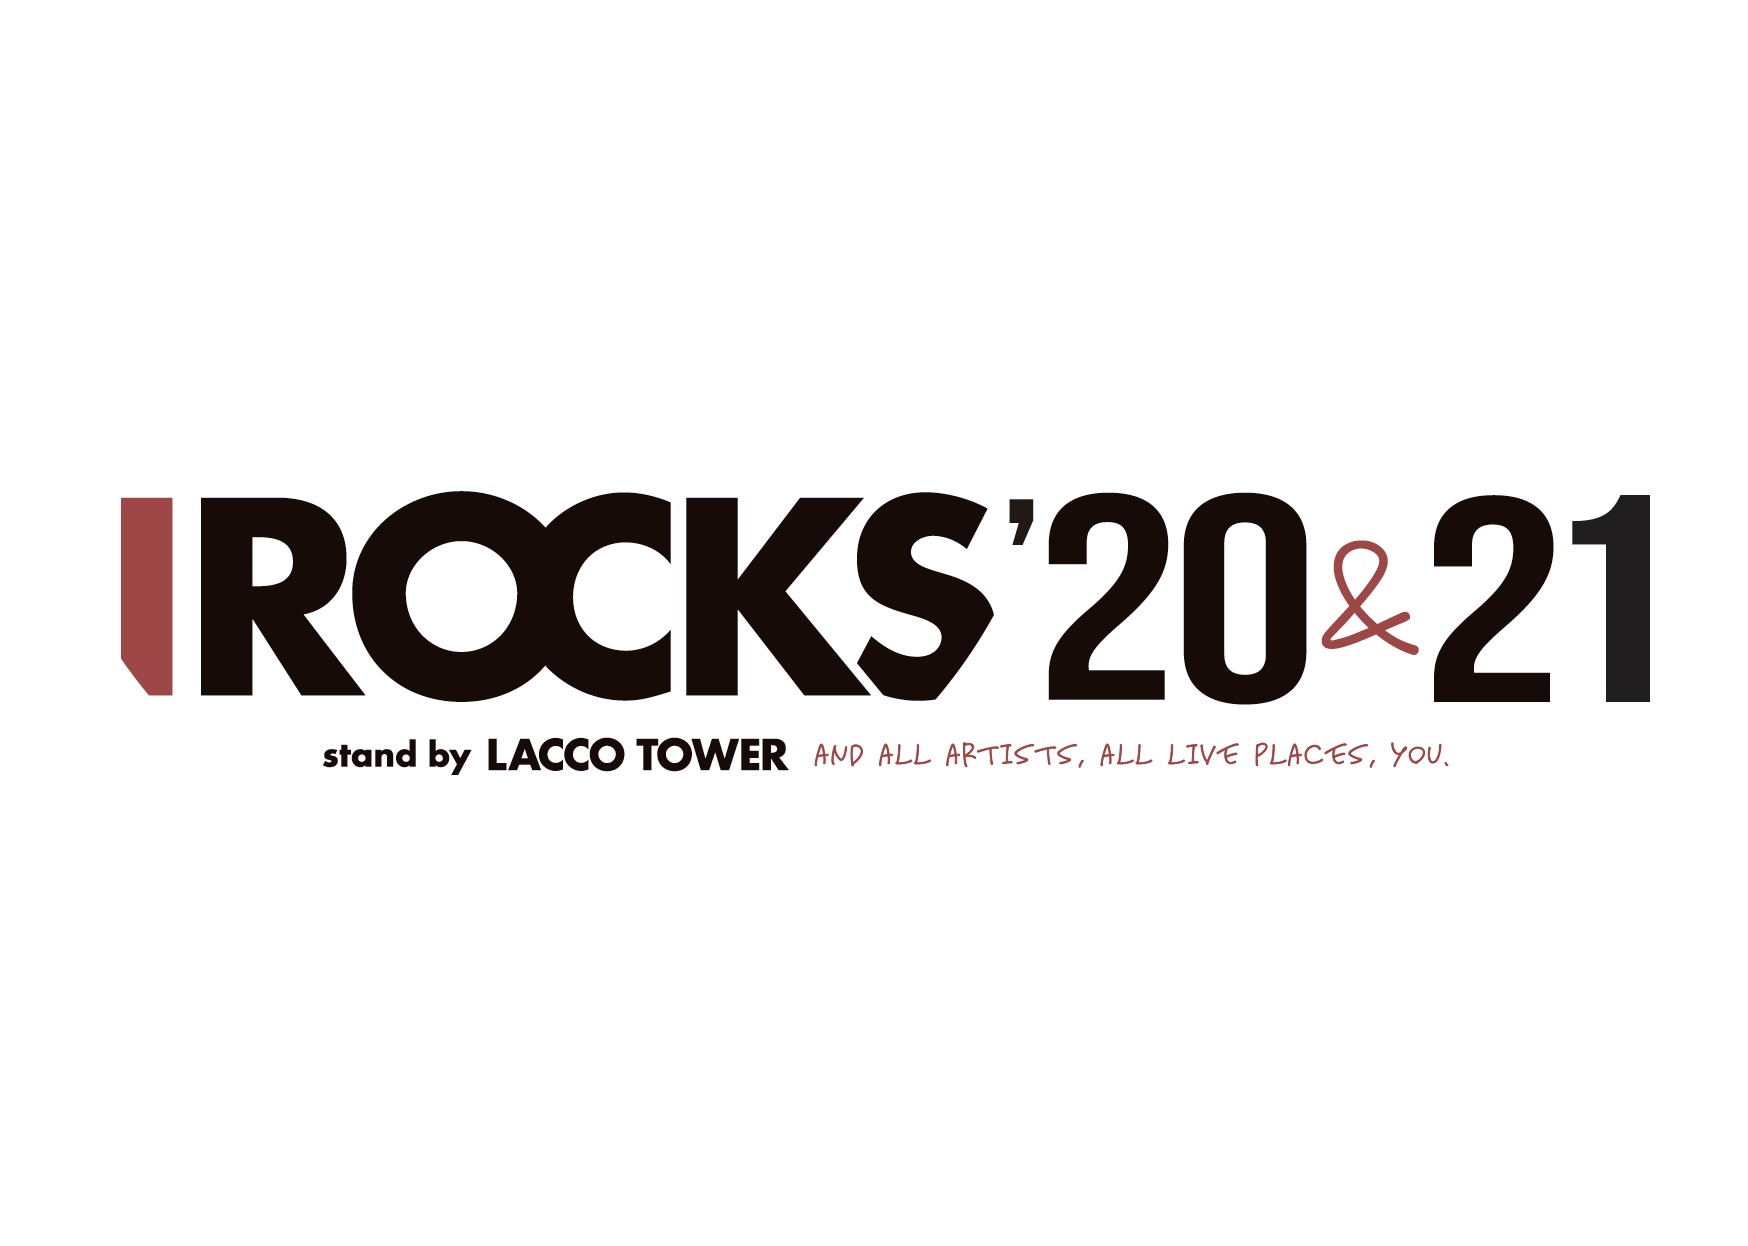 I ROCKS 20&21 stand by LACCO TOWER